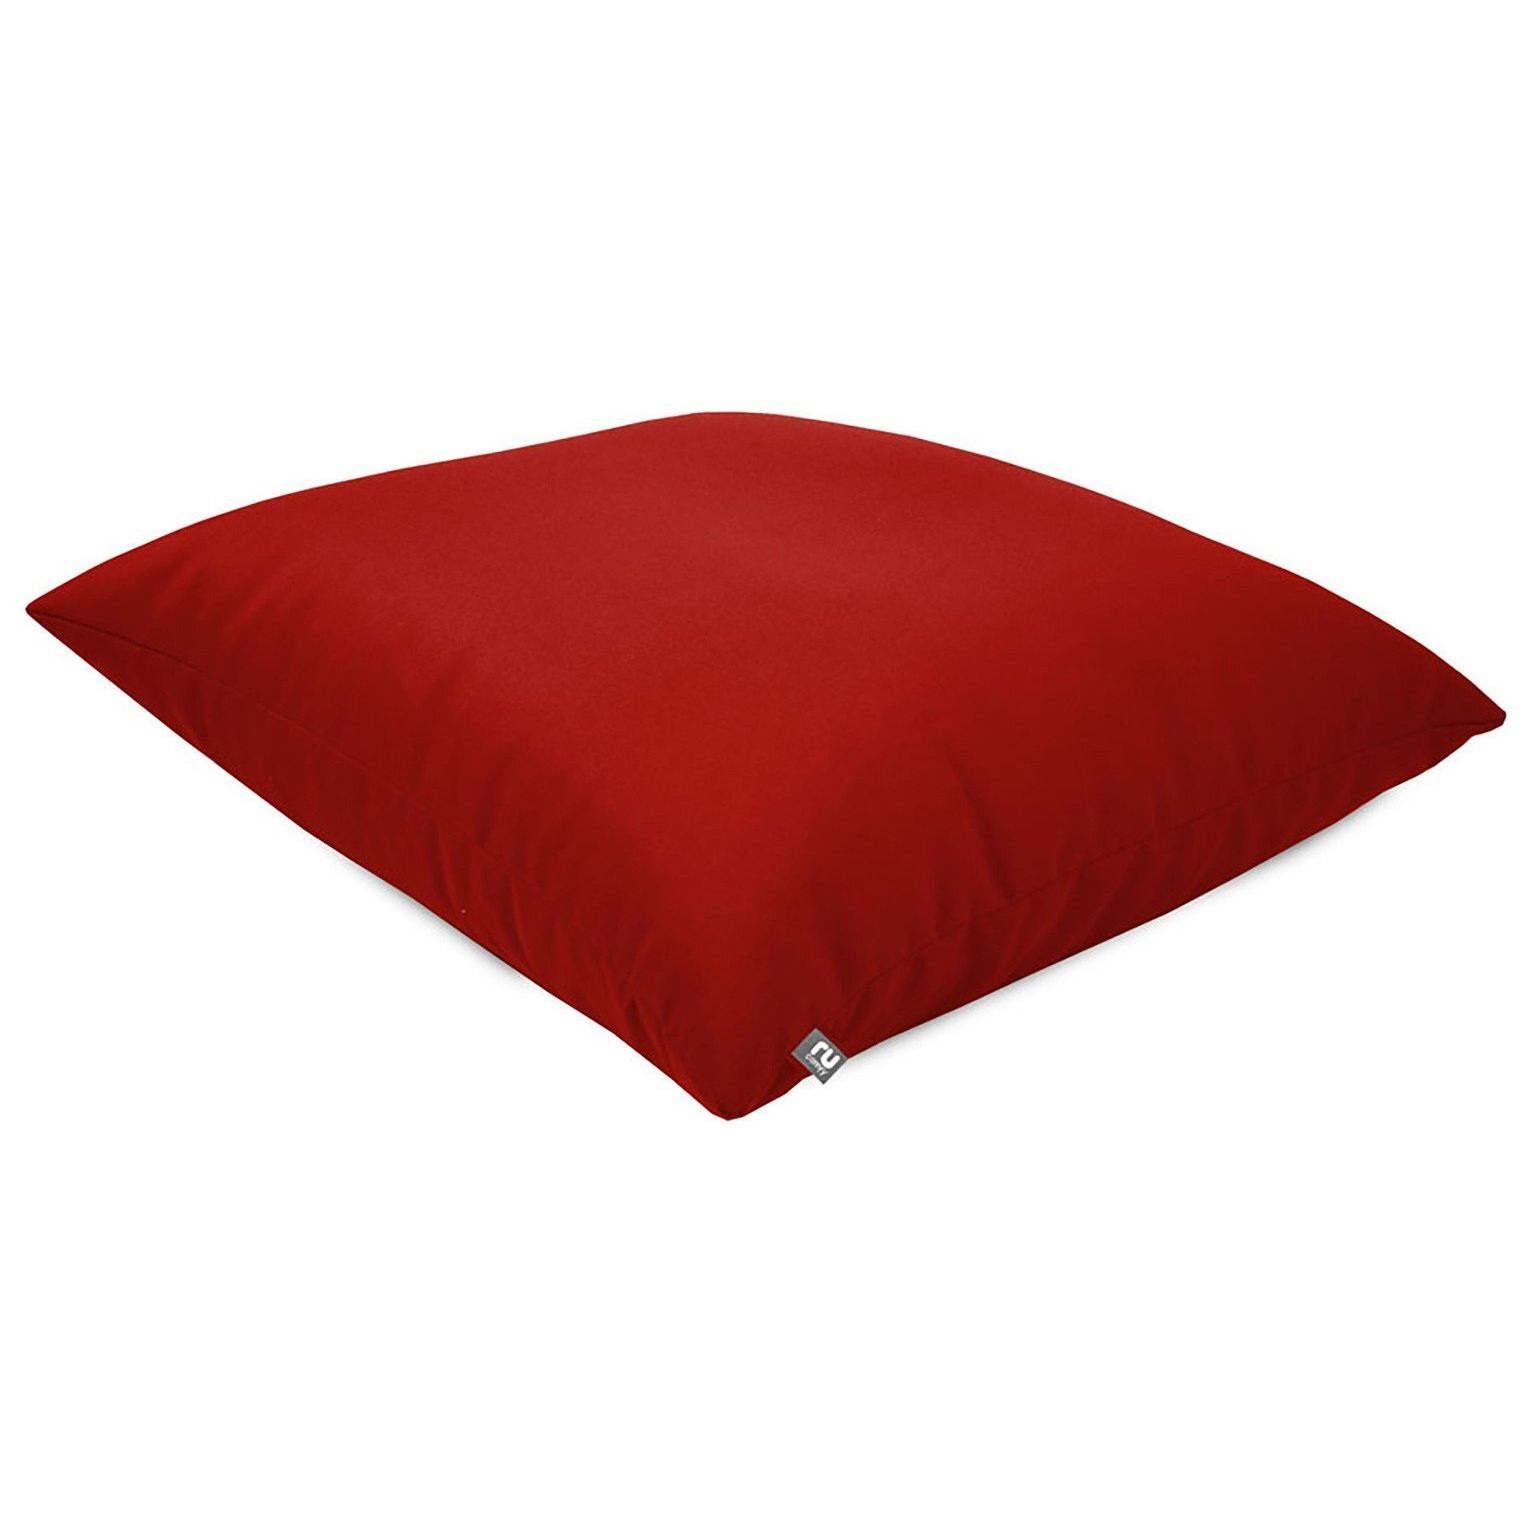 rucomfy Indoor Outdoor Large Floor Cushion - Red - image 1